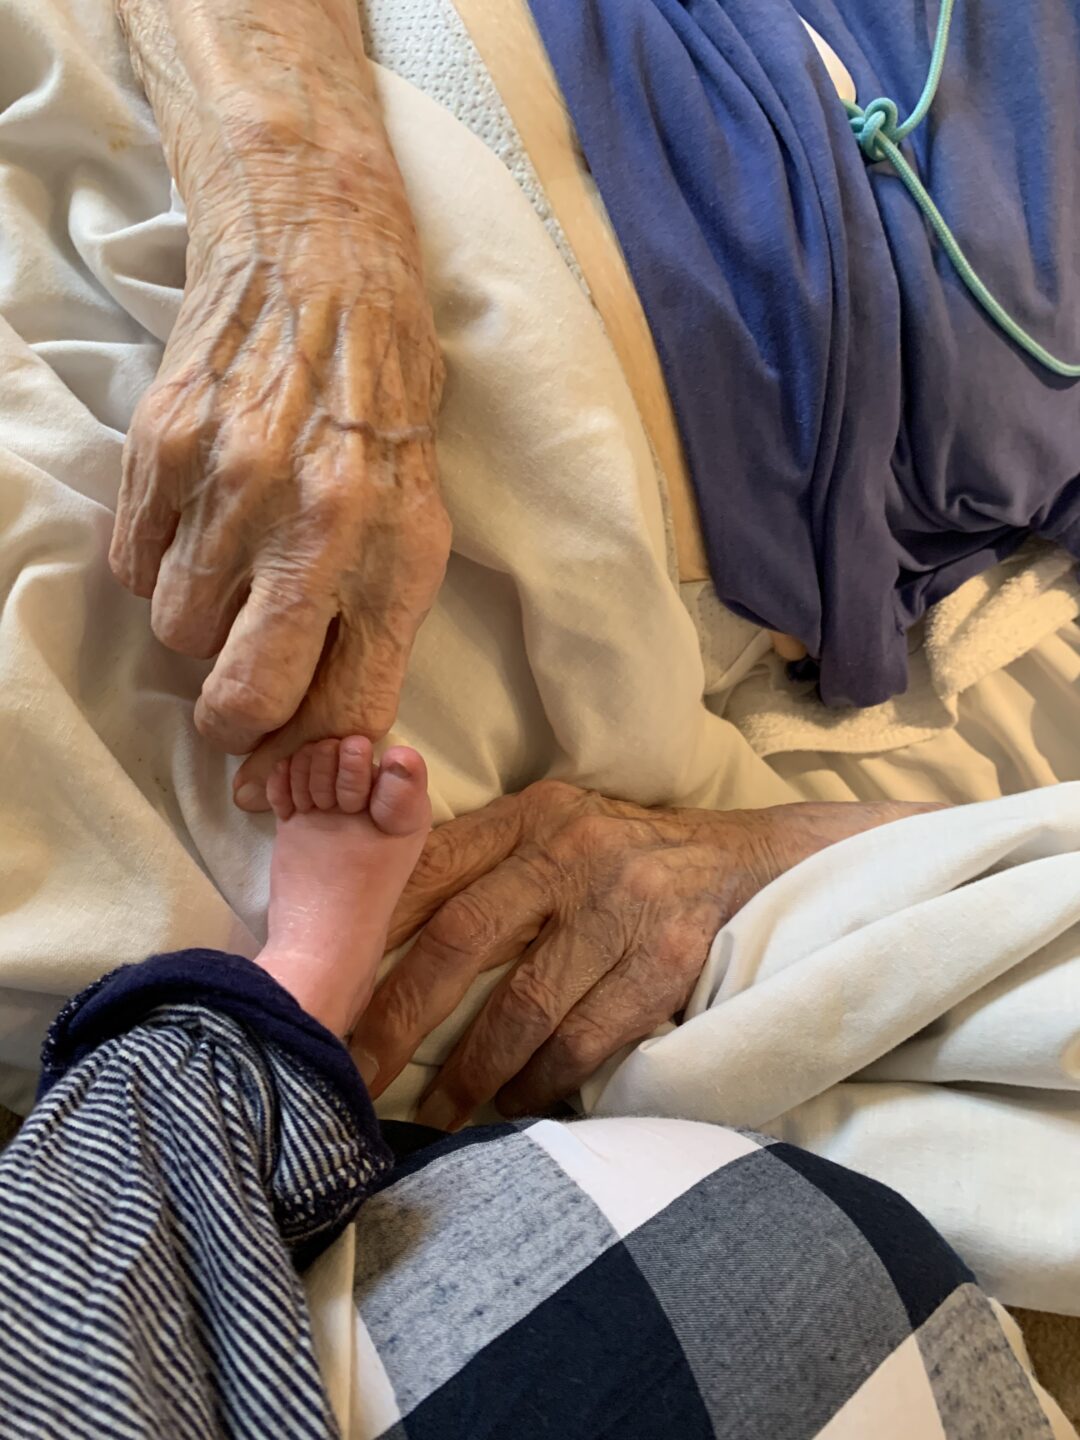 A close up of an An elderly Caucasian woman's hand next to a small Caucasian baby's foot.